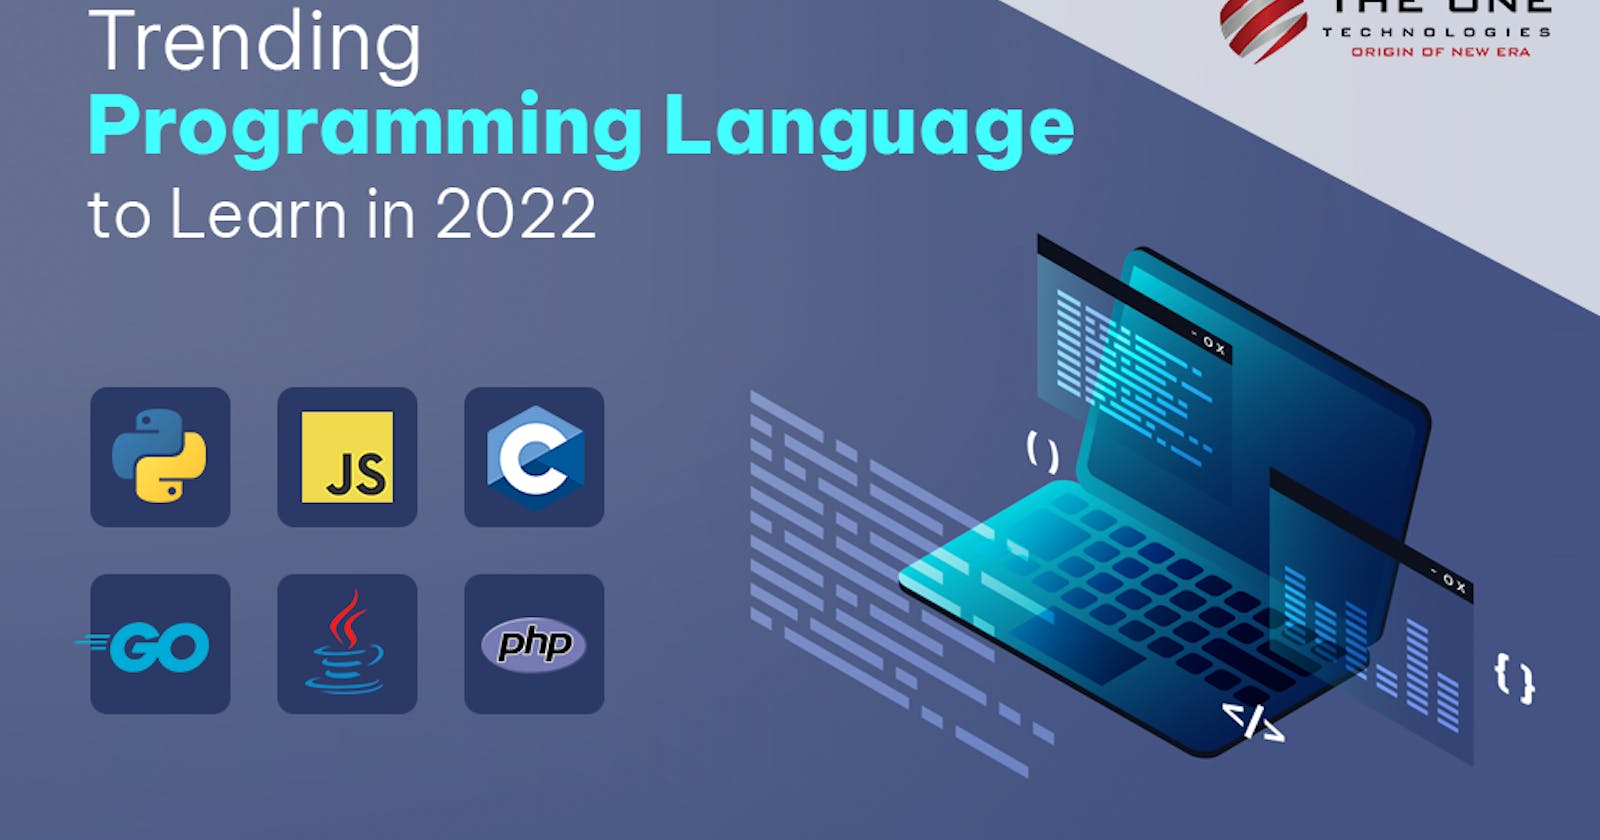 Trending Programming Language to Learn in 2022